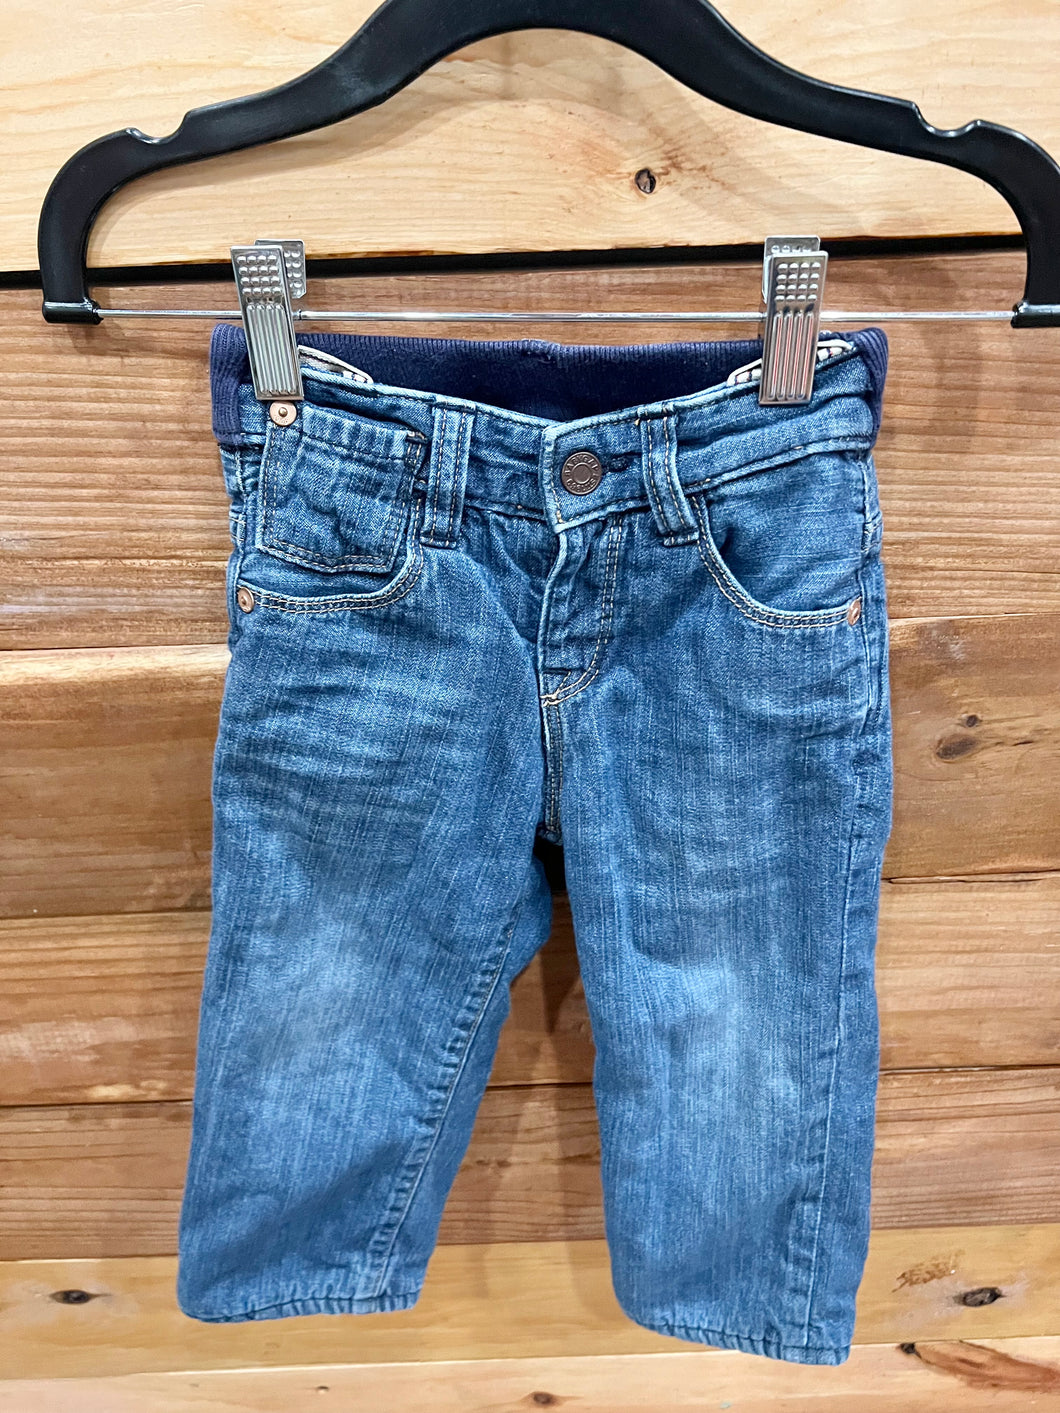 Gap Lined Jeans Size 18-24m